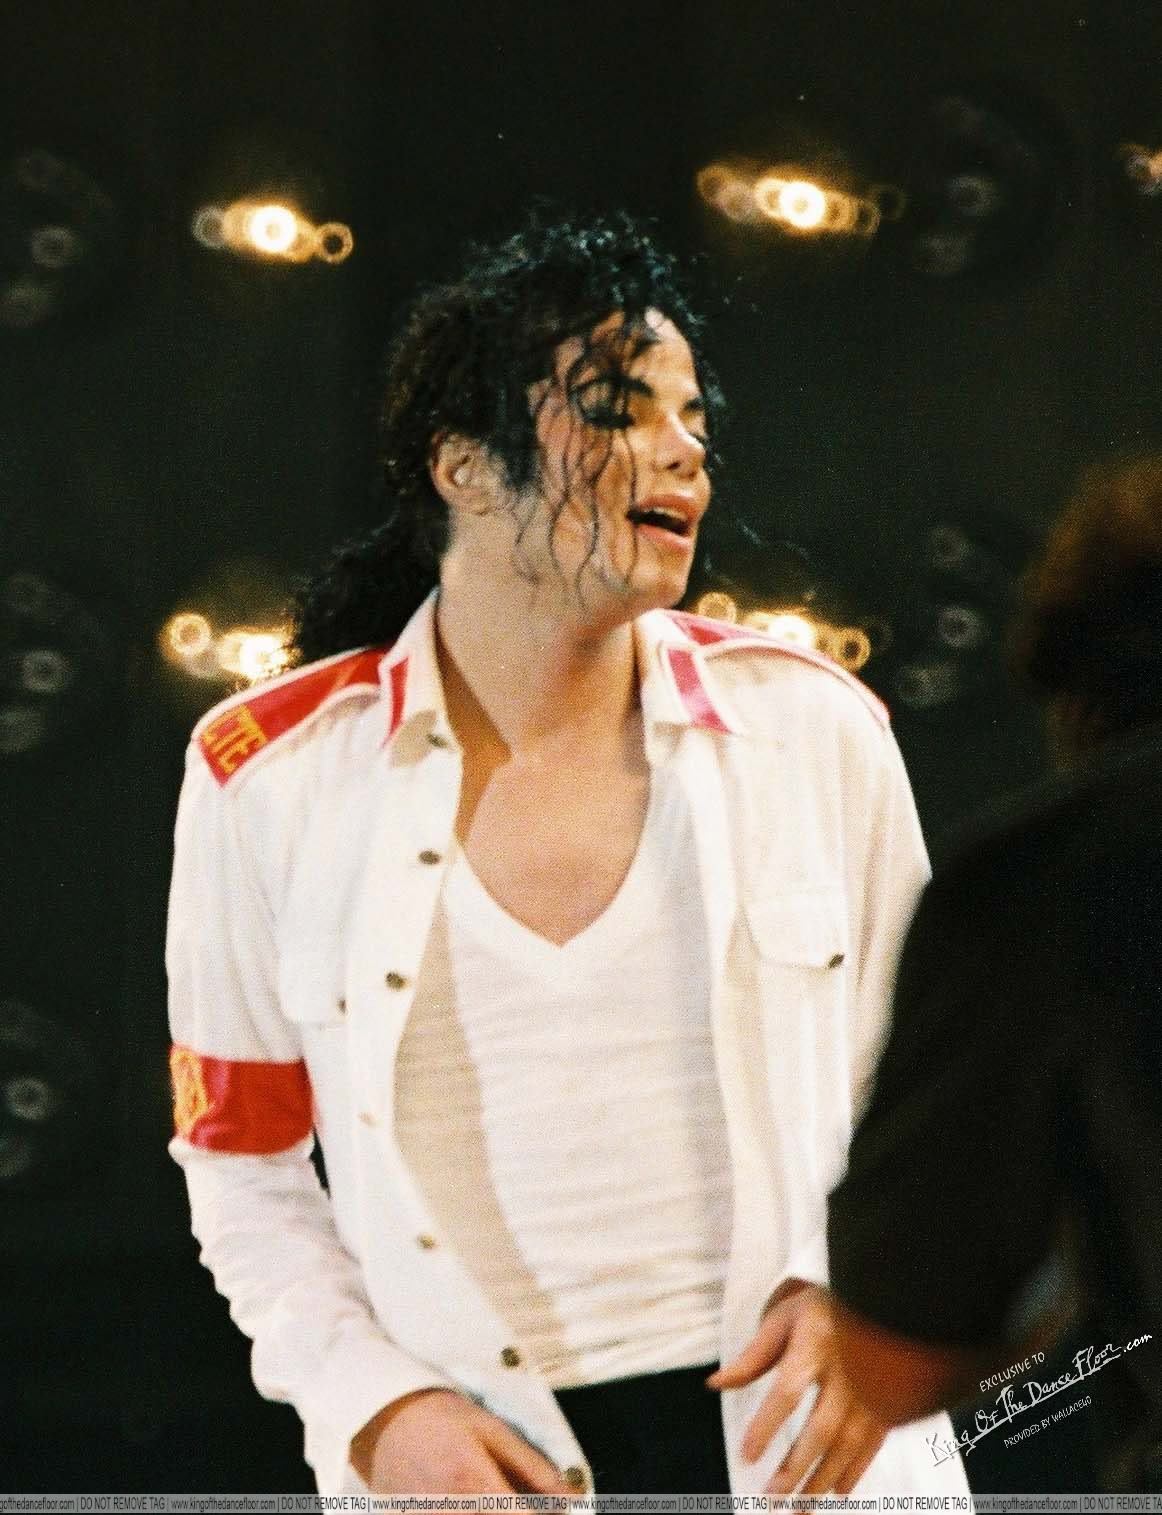 HQ pics of MJ performing MITM in Dangerous tour? (not the end credits and rocket man) [Archive] Jackson Community Official Fan Club Forum